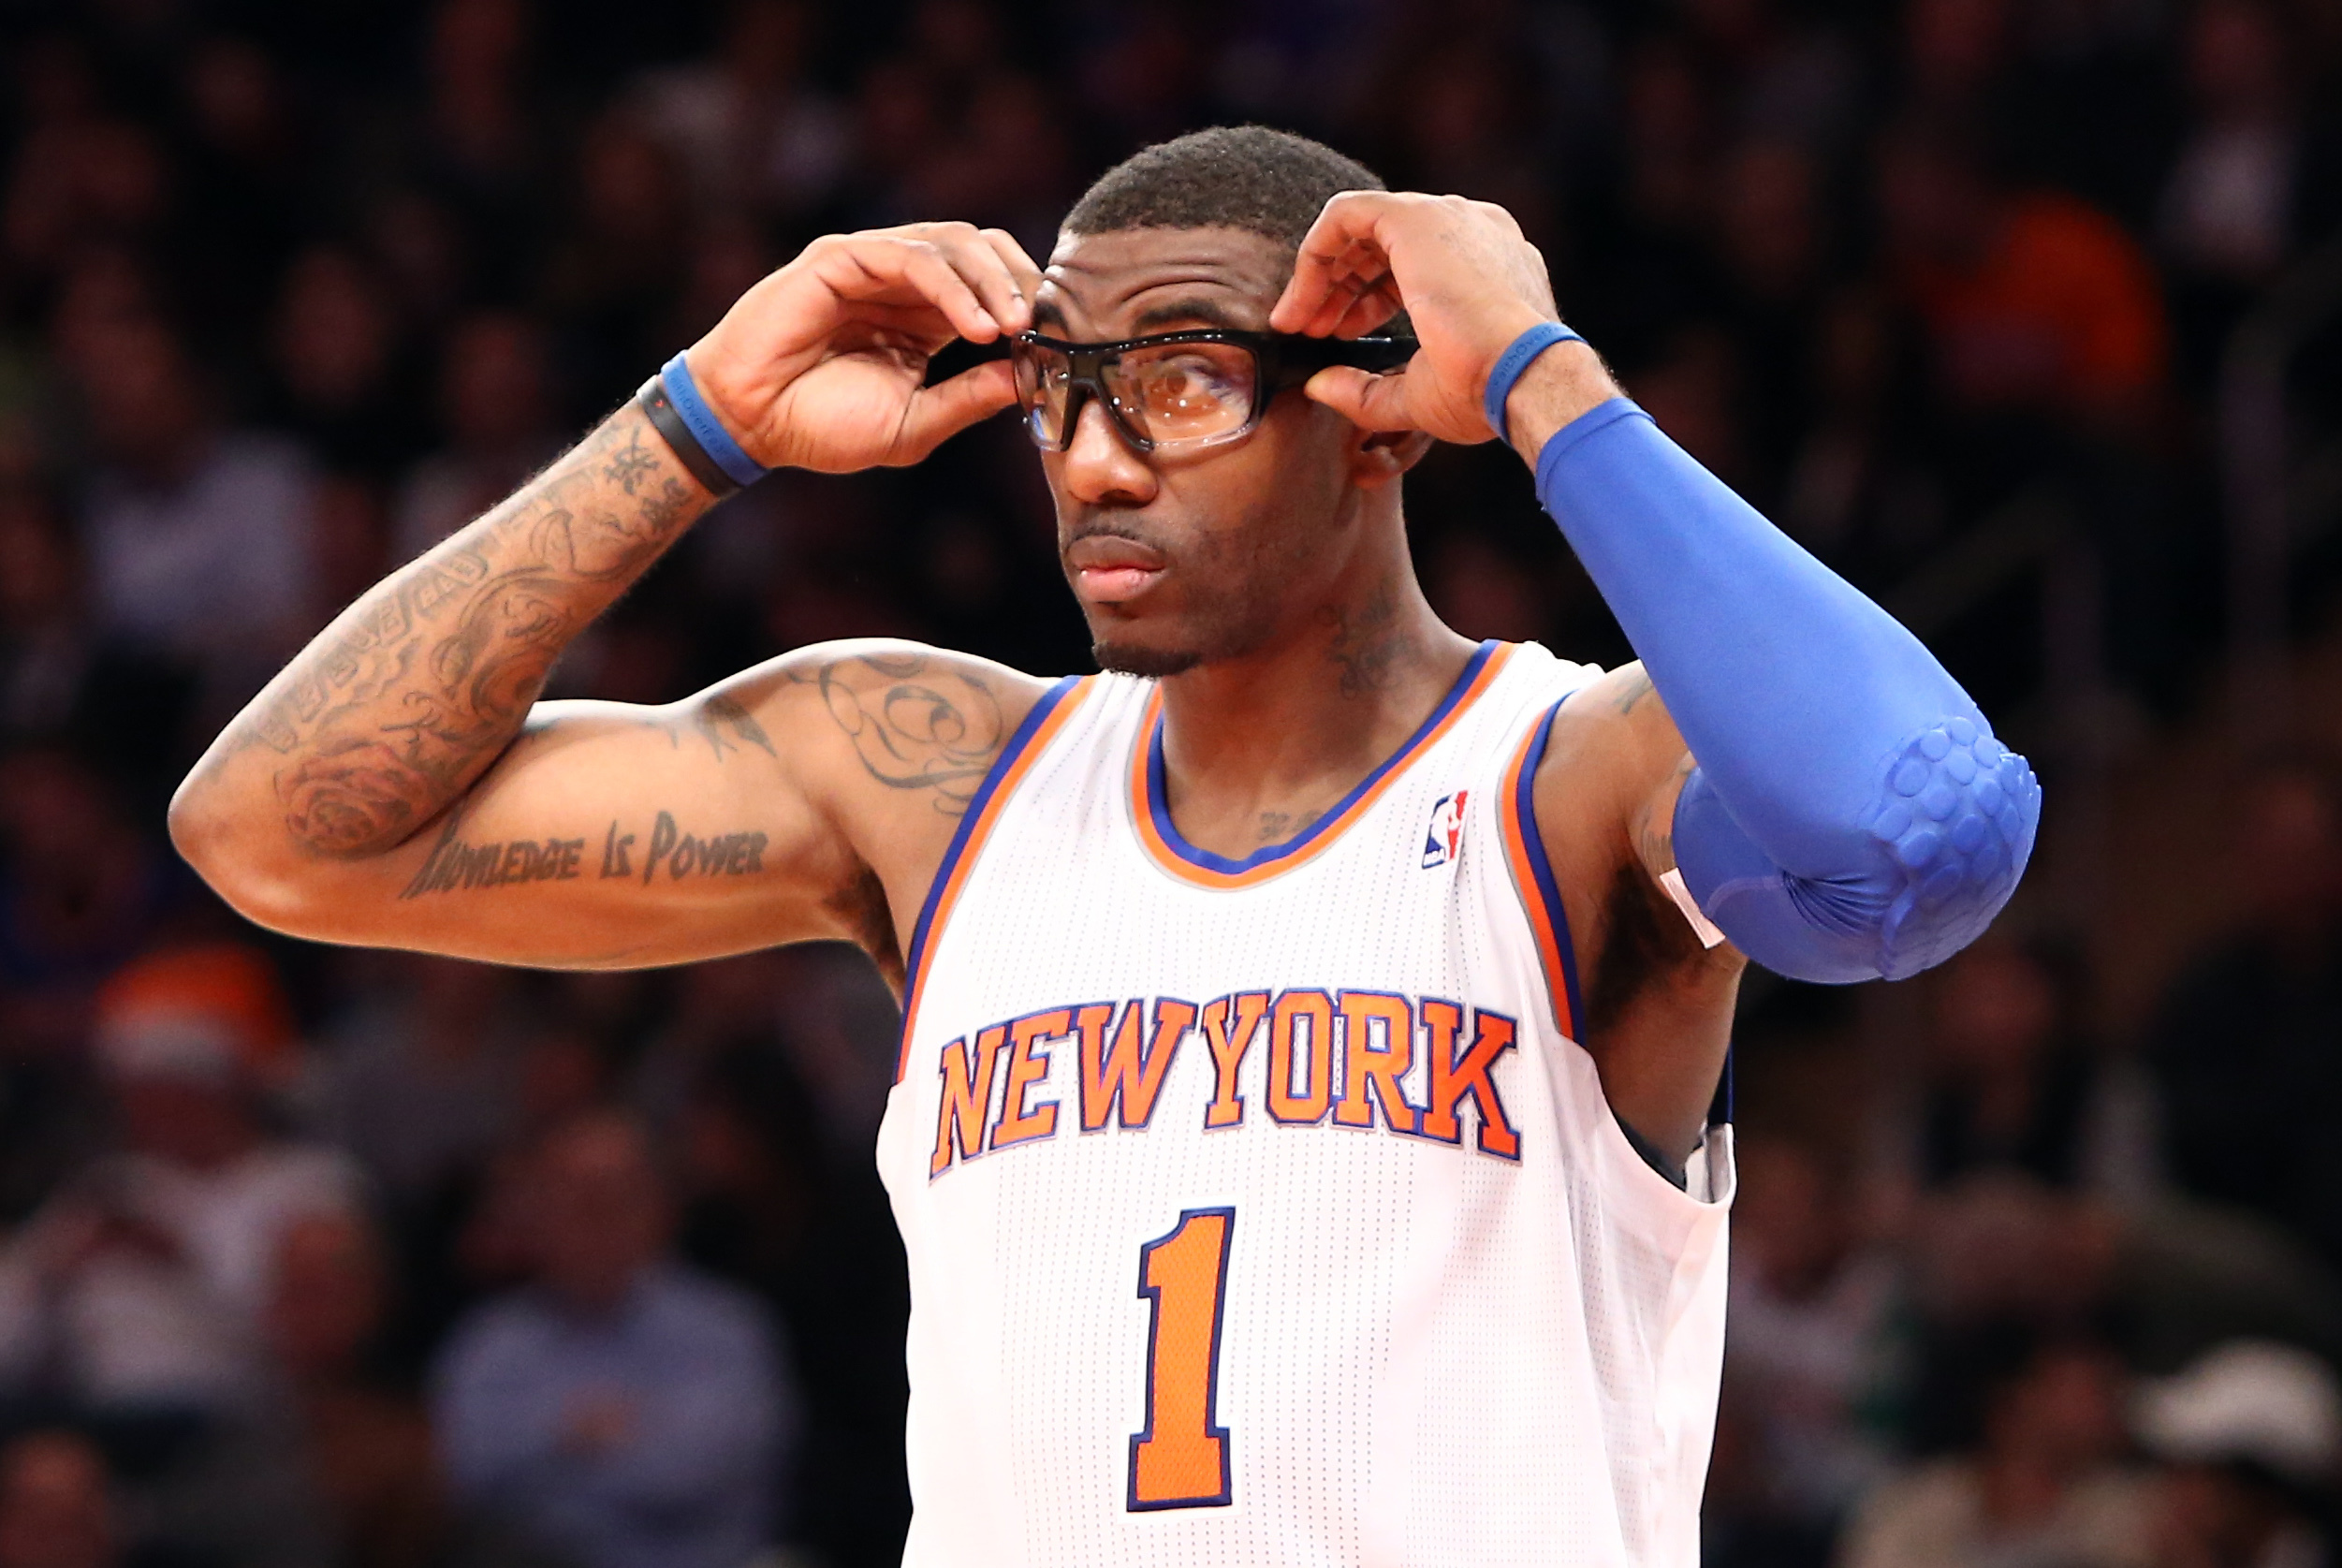 Amar'e Stoudemire scores 37 points to propel Knicks to 125-116 double  overtime victory over Pistons 